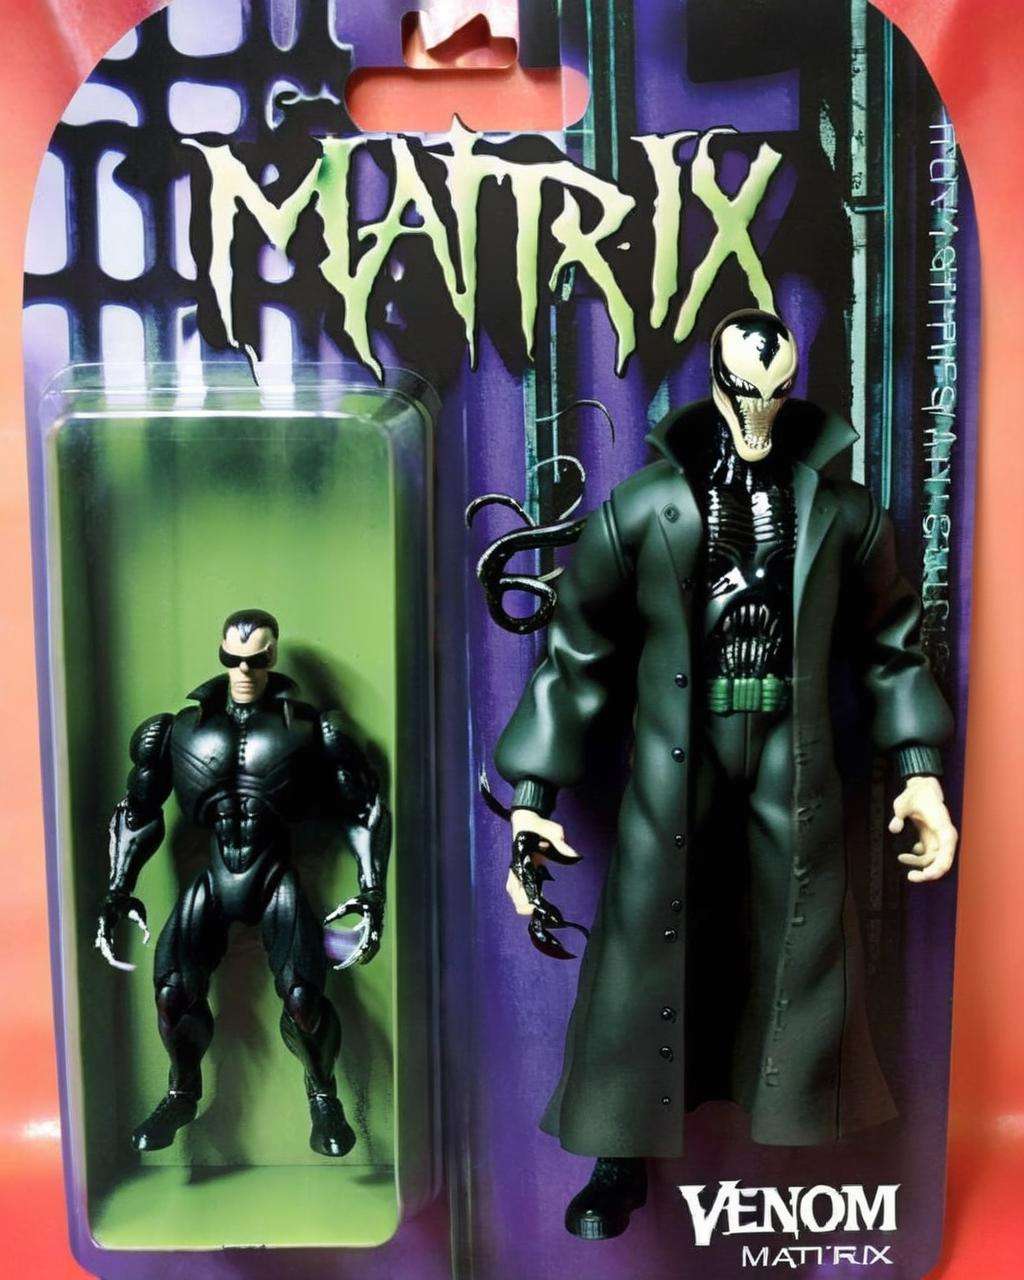 Venom-Matrix: Combining Venom and Neo from The Matrix, this action figure embodies symbiotic chaos:0.6 and digital rebellion:0.4. <lora:Awe_Toys:1.0>